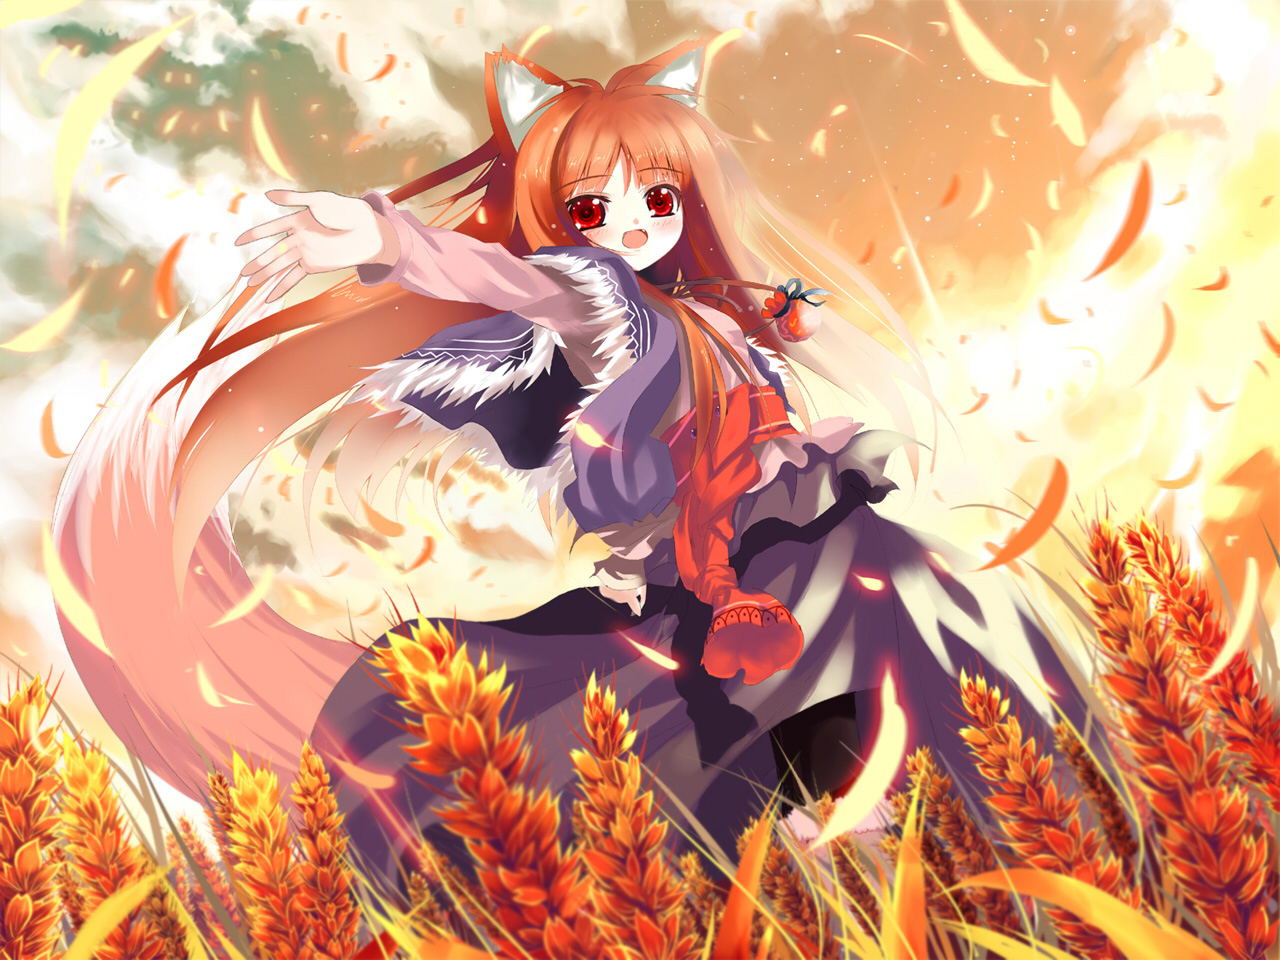 Free Download Muryou Anime Wallpaper Spice And Wolf Horo 1280x960 For Your Desktop Mobile Tablet Explore 45 Anime Wolf Wallpapers Wolfs Rain Wallpaper Cool Anime Wolf Wallpapers Spice And Wolf Wallpaper